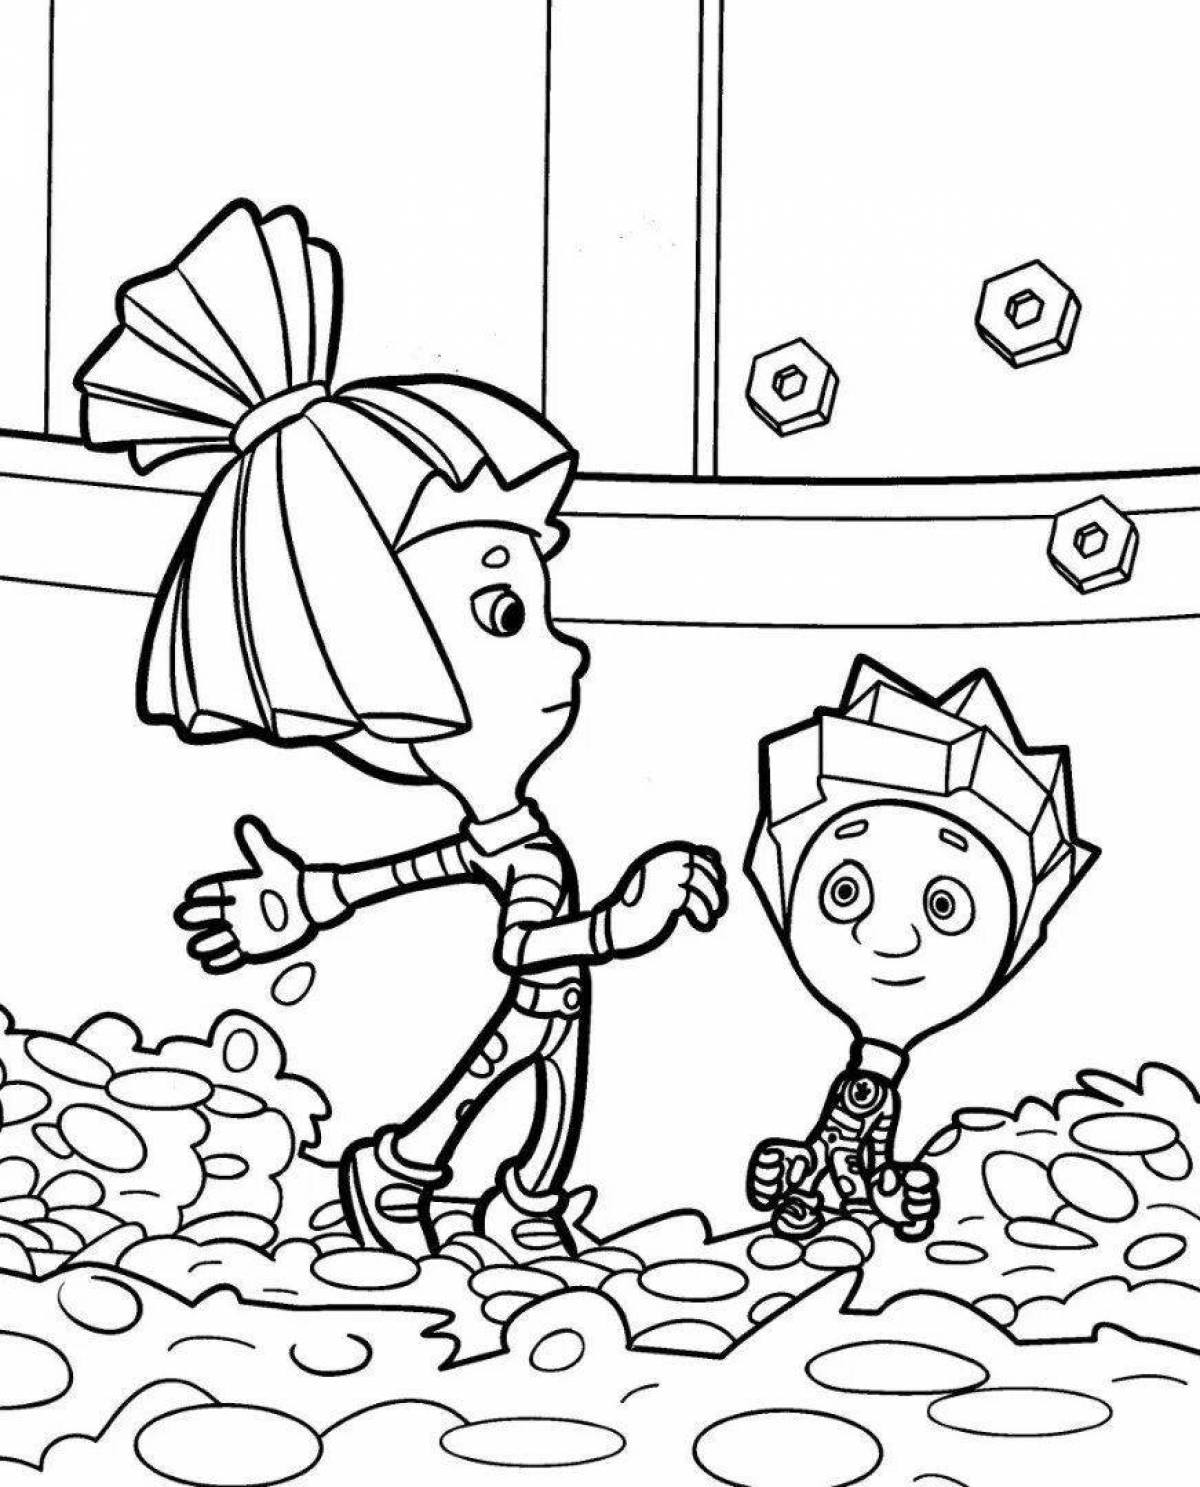 Funny fixies coloring pages for boys